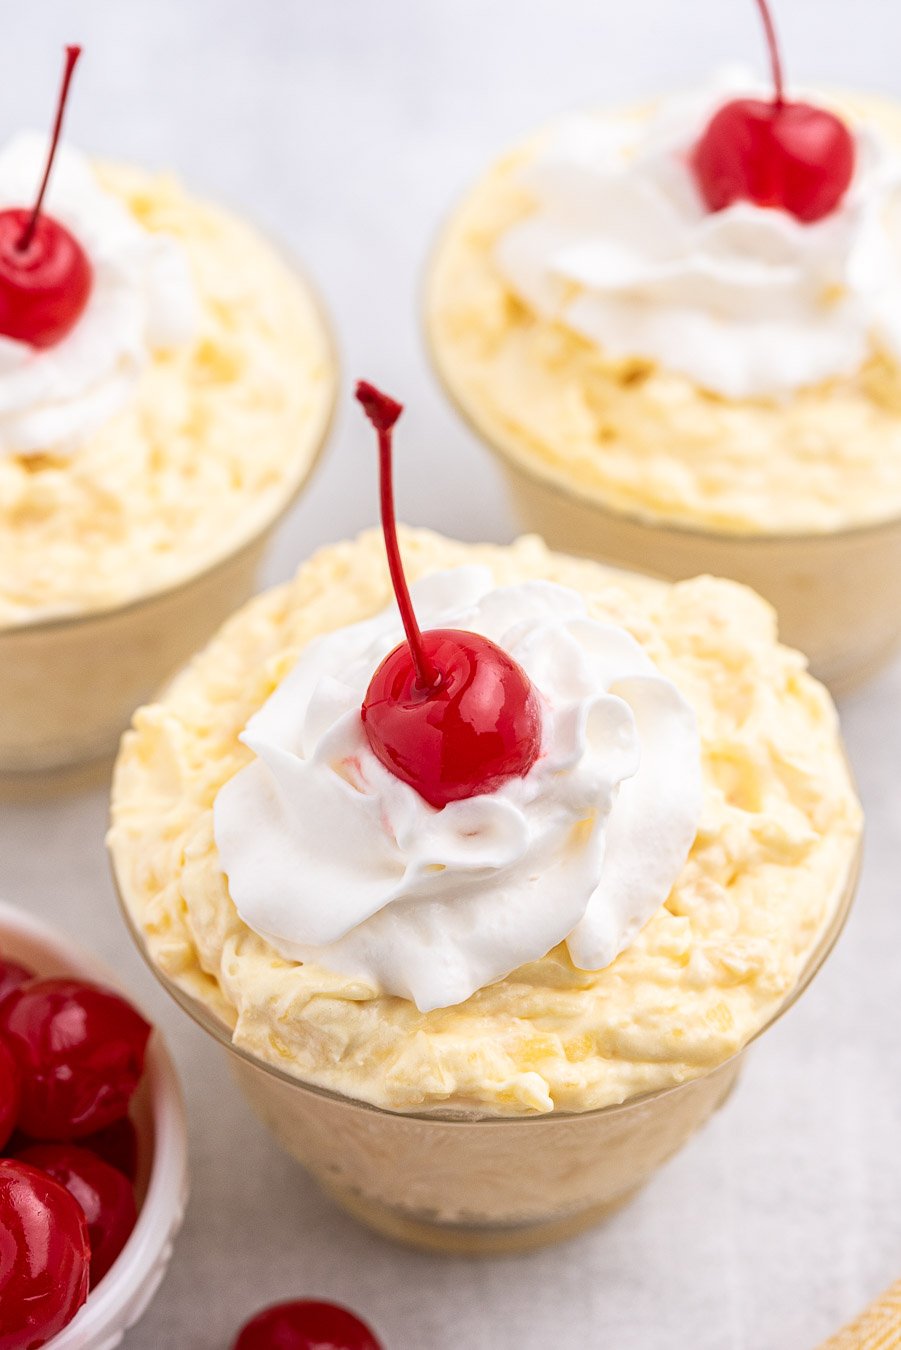 angled down view of pineapple pudding served in individual dishes with whipped cream and a cherry on top